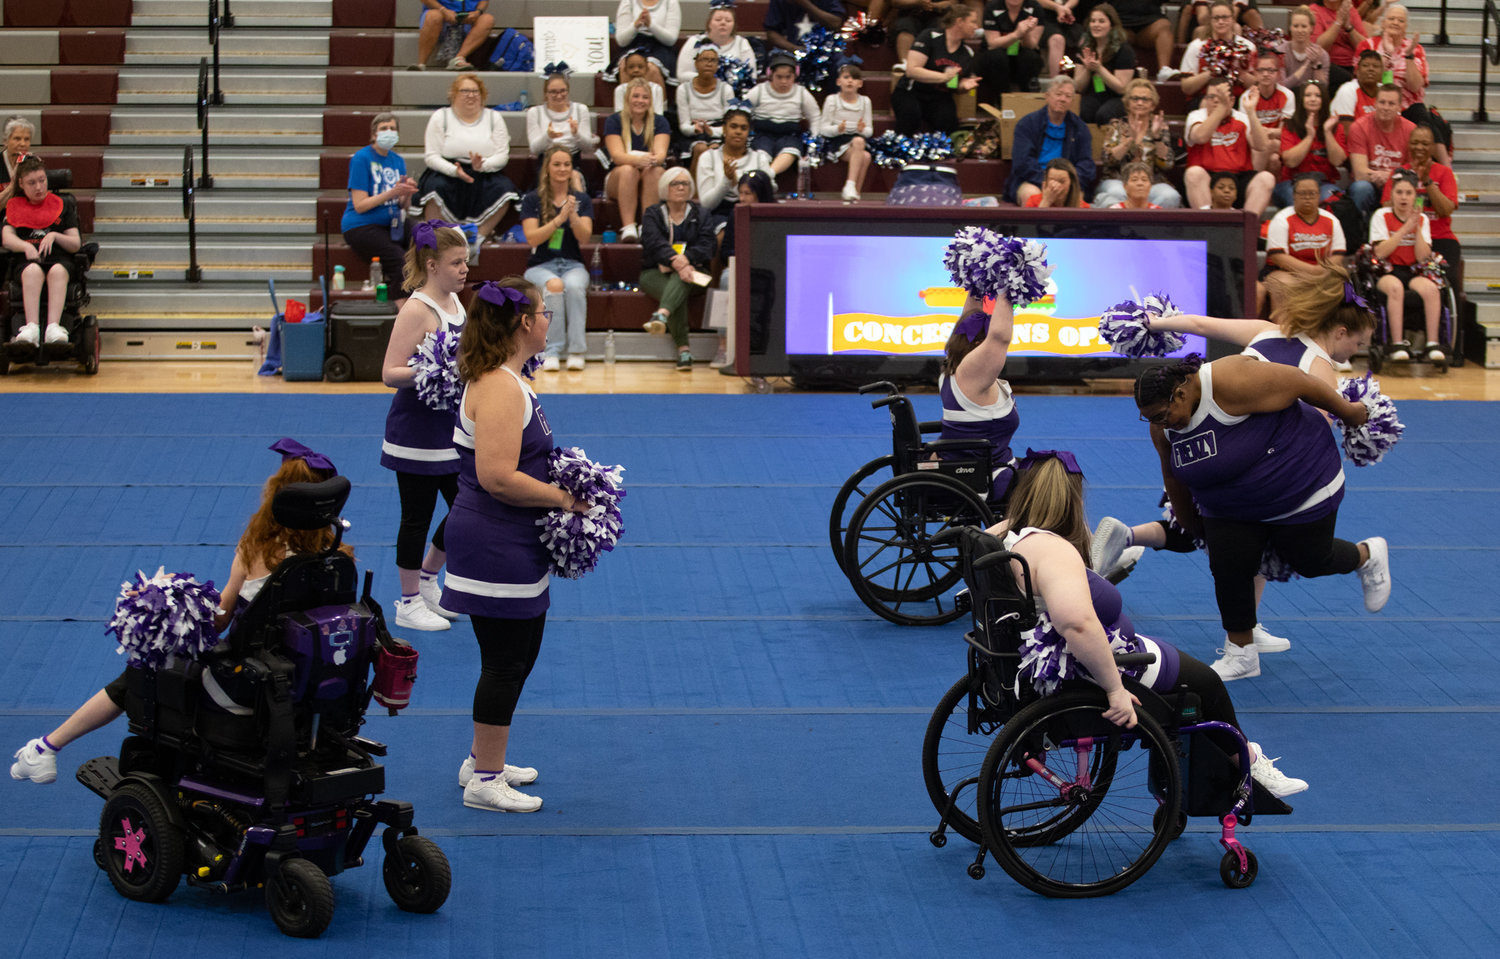 Athletes from the Forsyth Frenzy perform their cheerleading routine for the crowd at Seaforth during Saturday's Special Olympics competition.